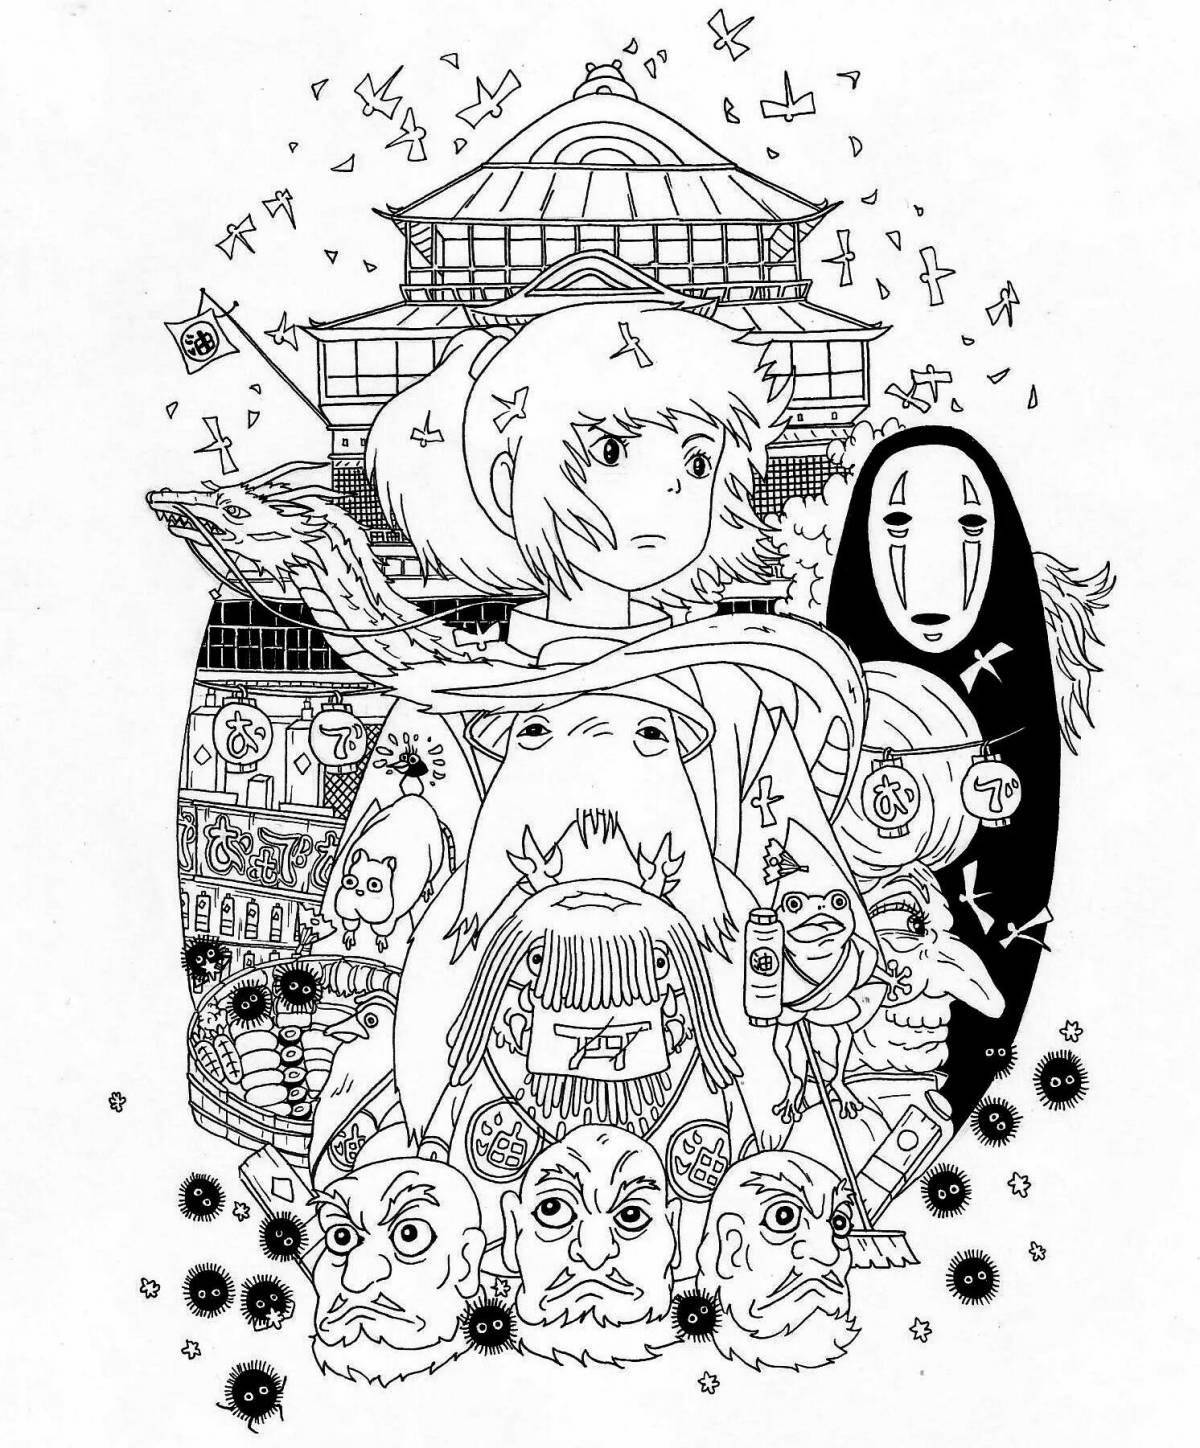 Deluxe coloring book of howl's moving castle anime